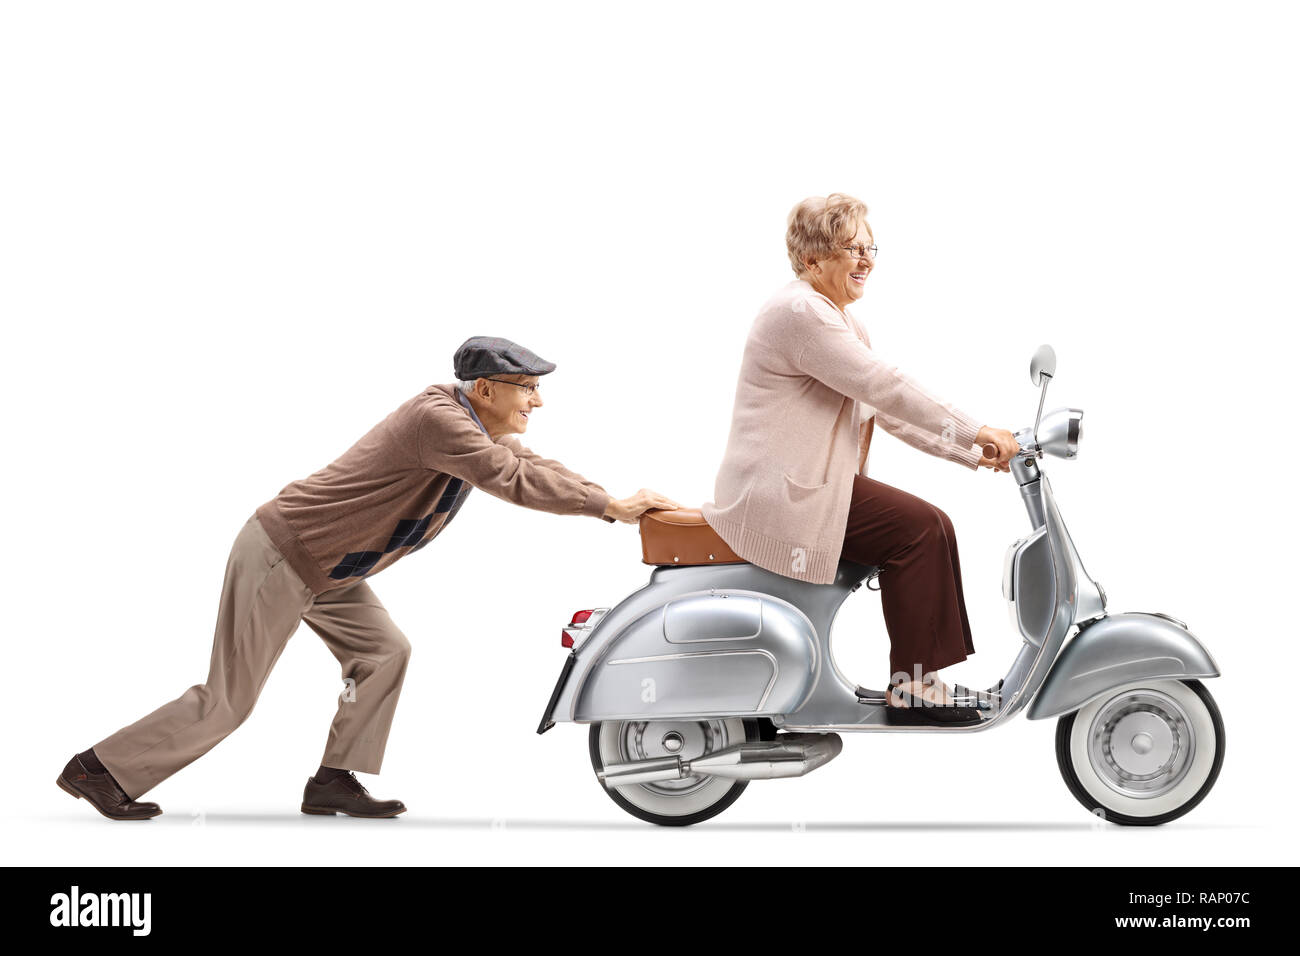 Full length shot of a senior man pushing a smiling senior woman riding a vintage scooter isolated on white background Stock Photo